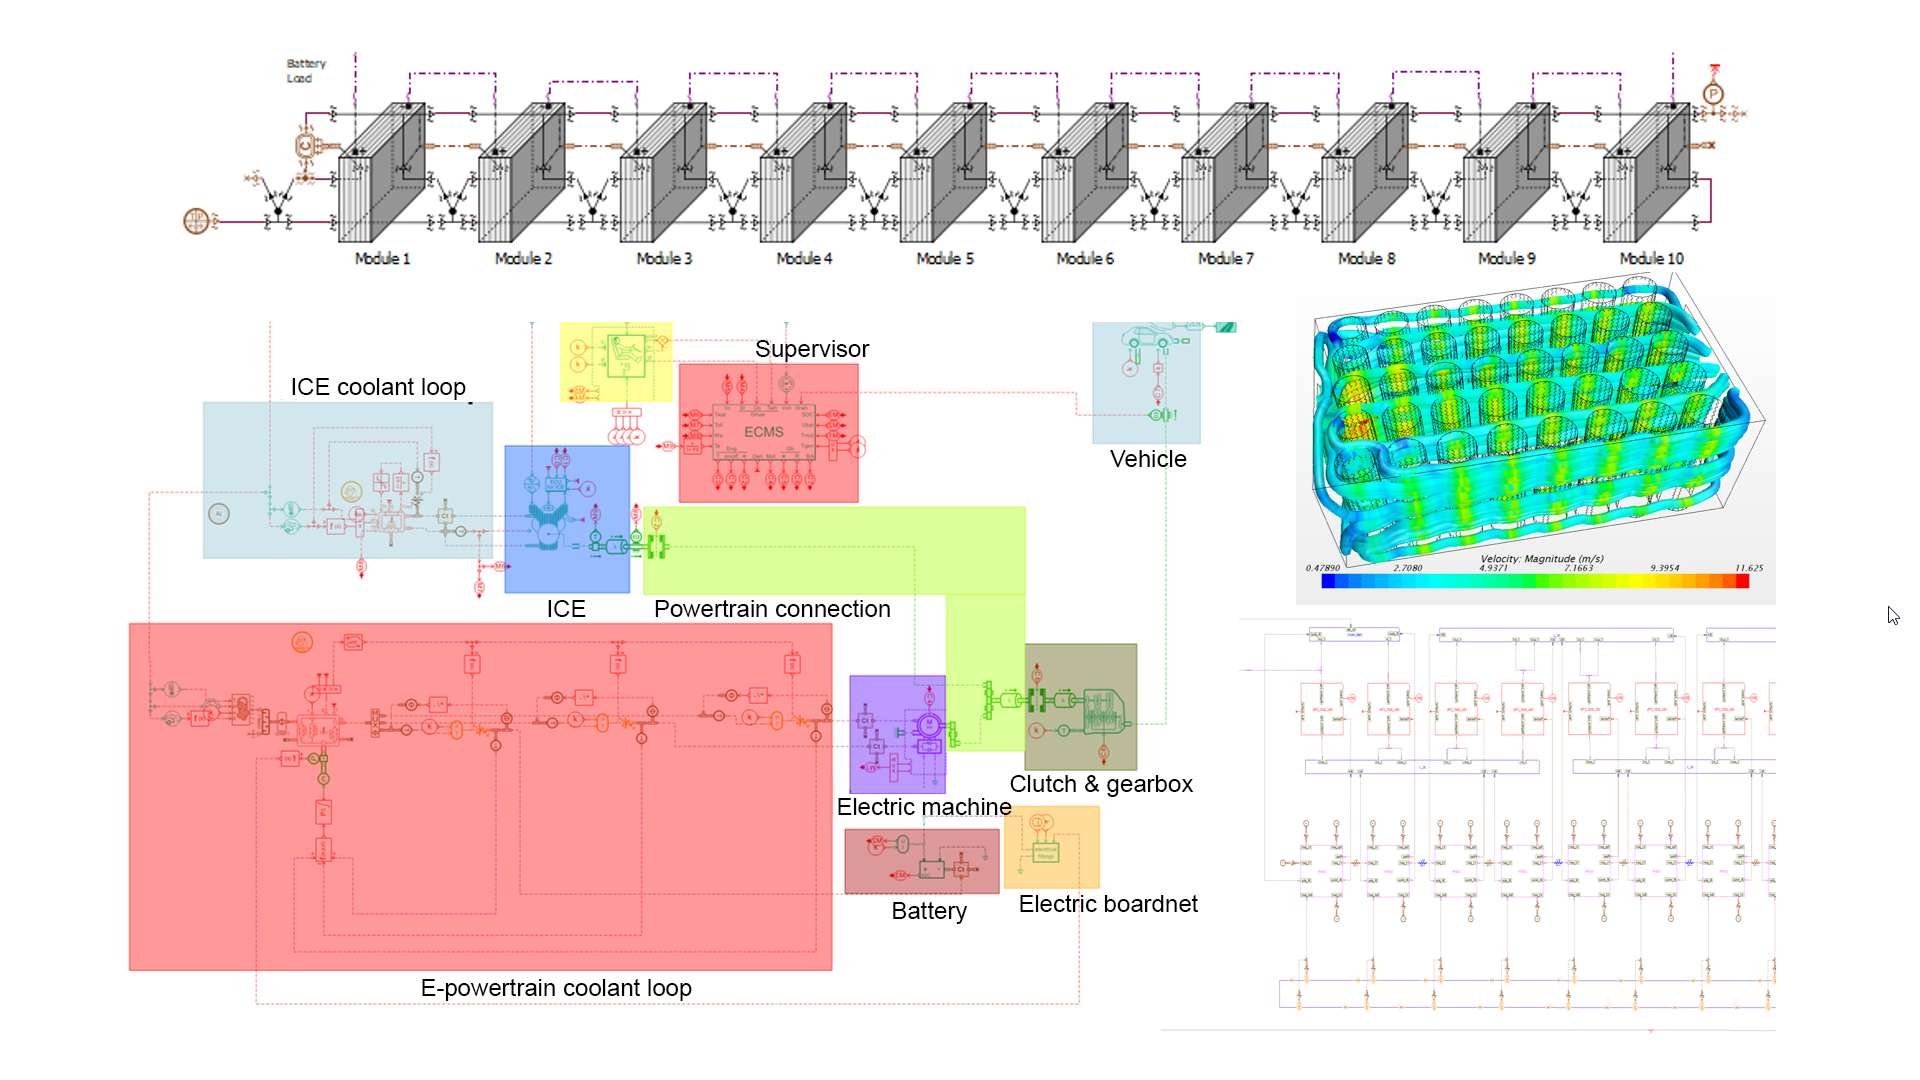 Optimizing battery thermal management system design and architecture using multi-level modeling